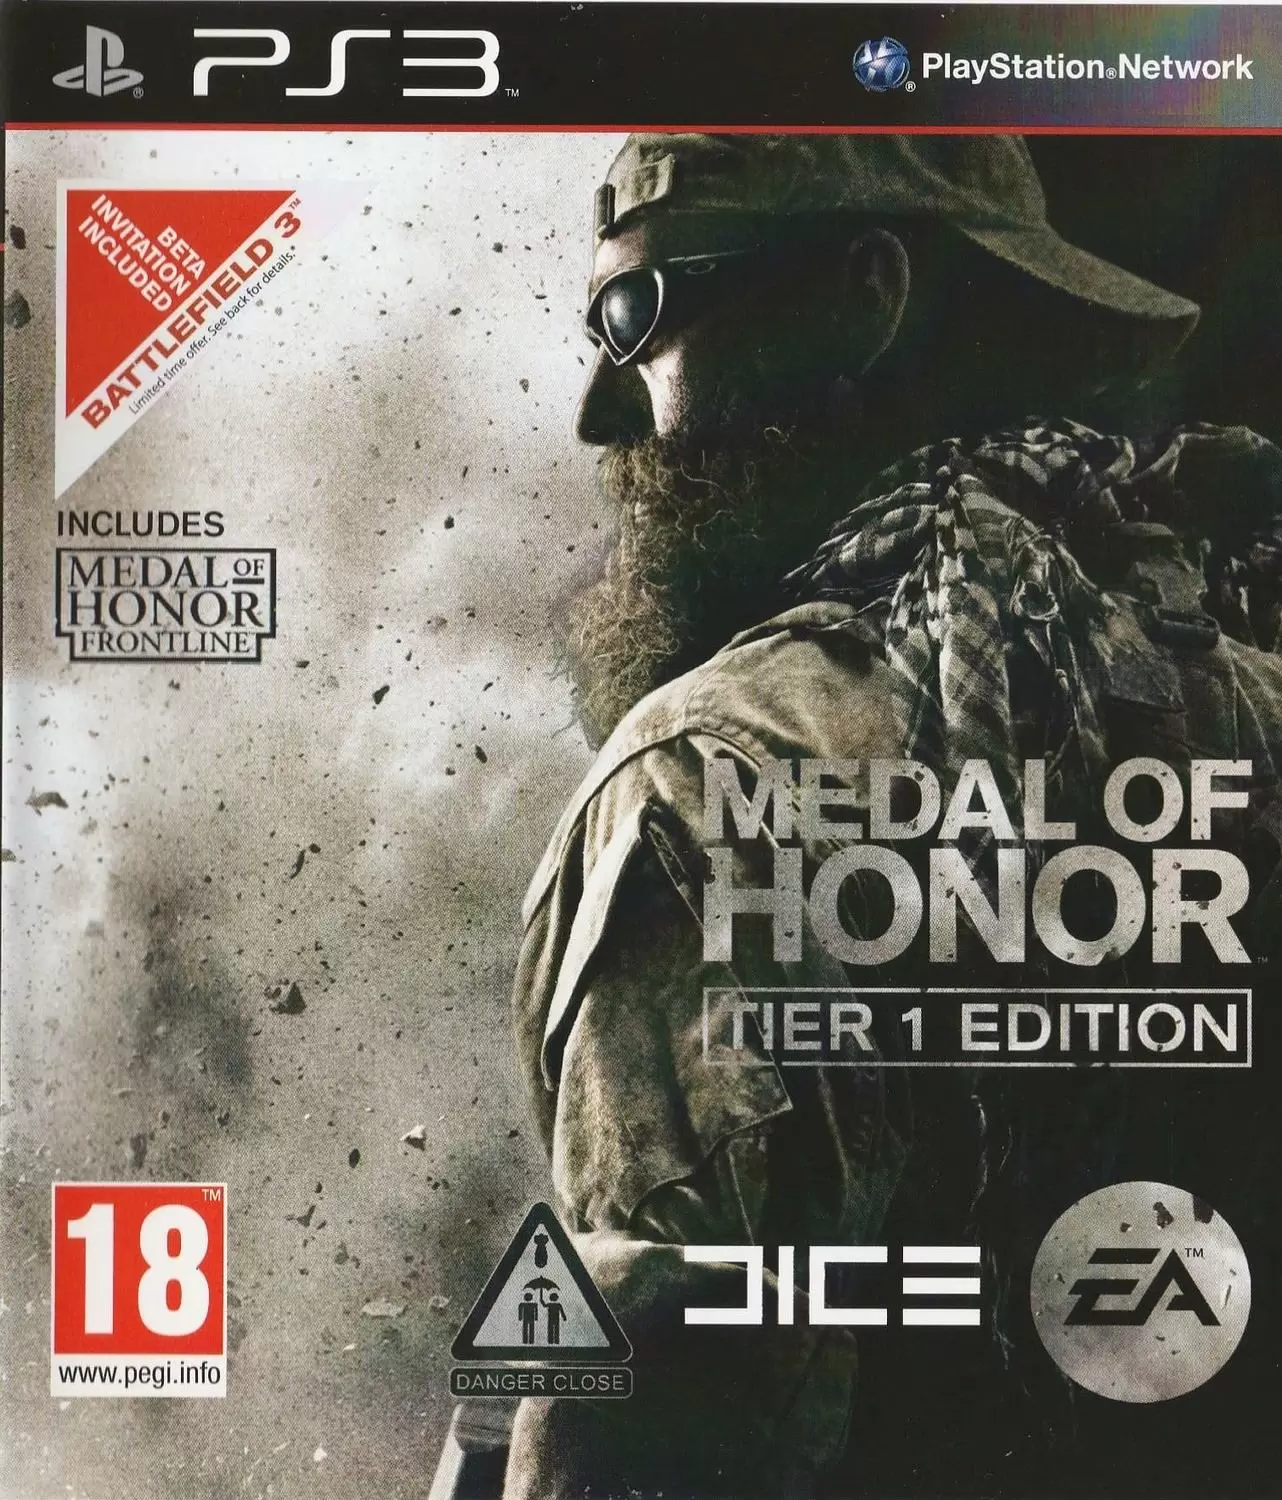 Medal of honor edition. Medal of Honor Limited Edition ps3. Игра Medal of Honor на PLAYSTATION 3. Медаль оф хонор на пс3. Medal of Honor ps3 обложка.